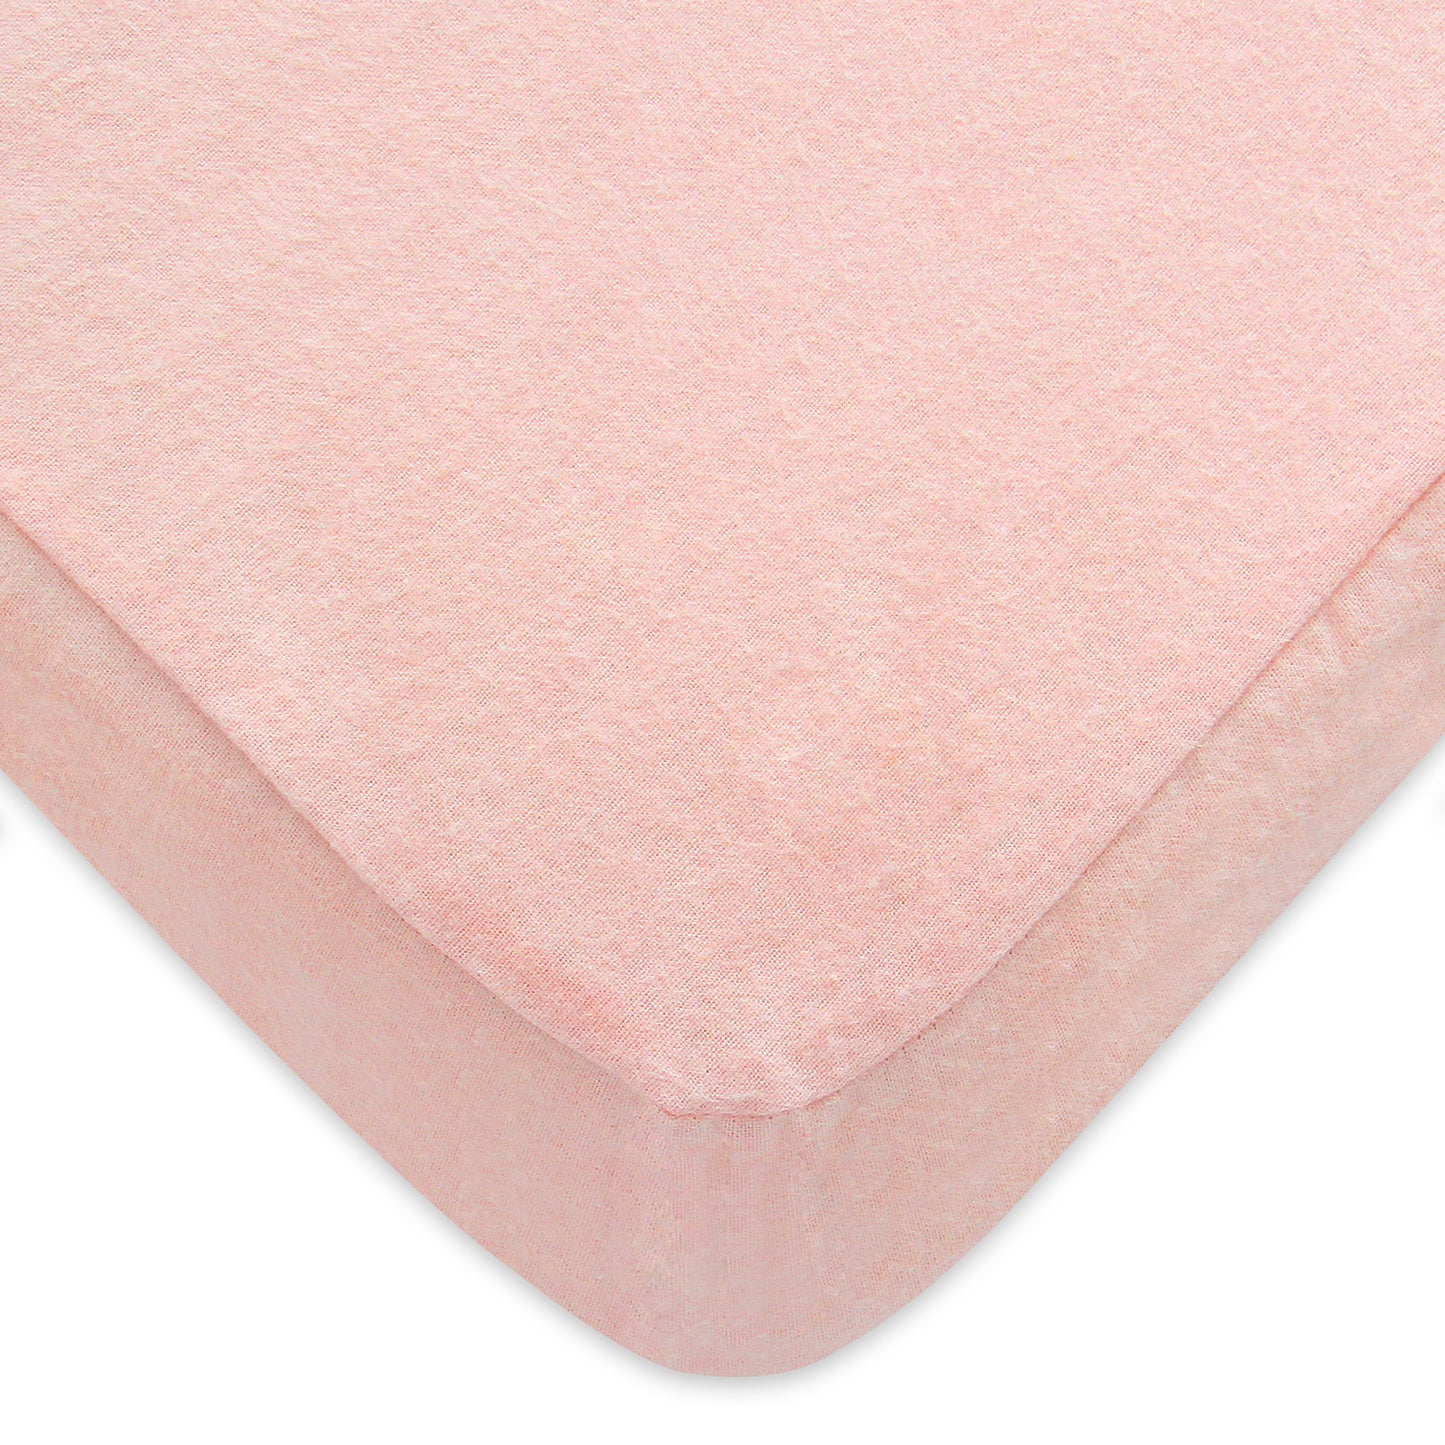 Pack N Play Sheet-100% Cotton Flannel, Heavenly Soft, Pink